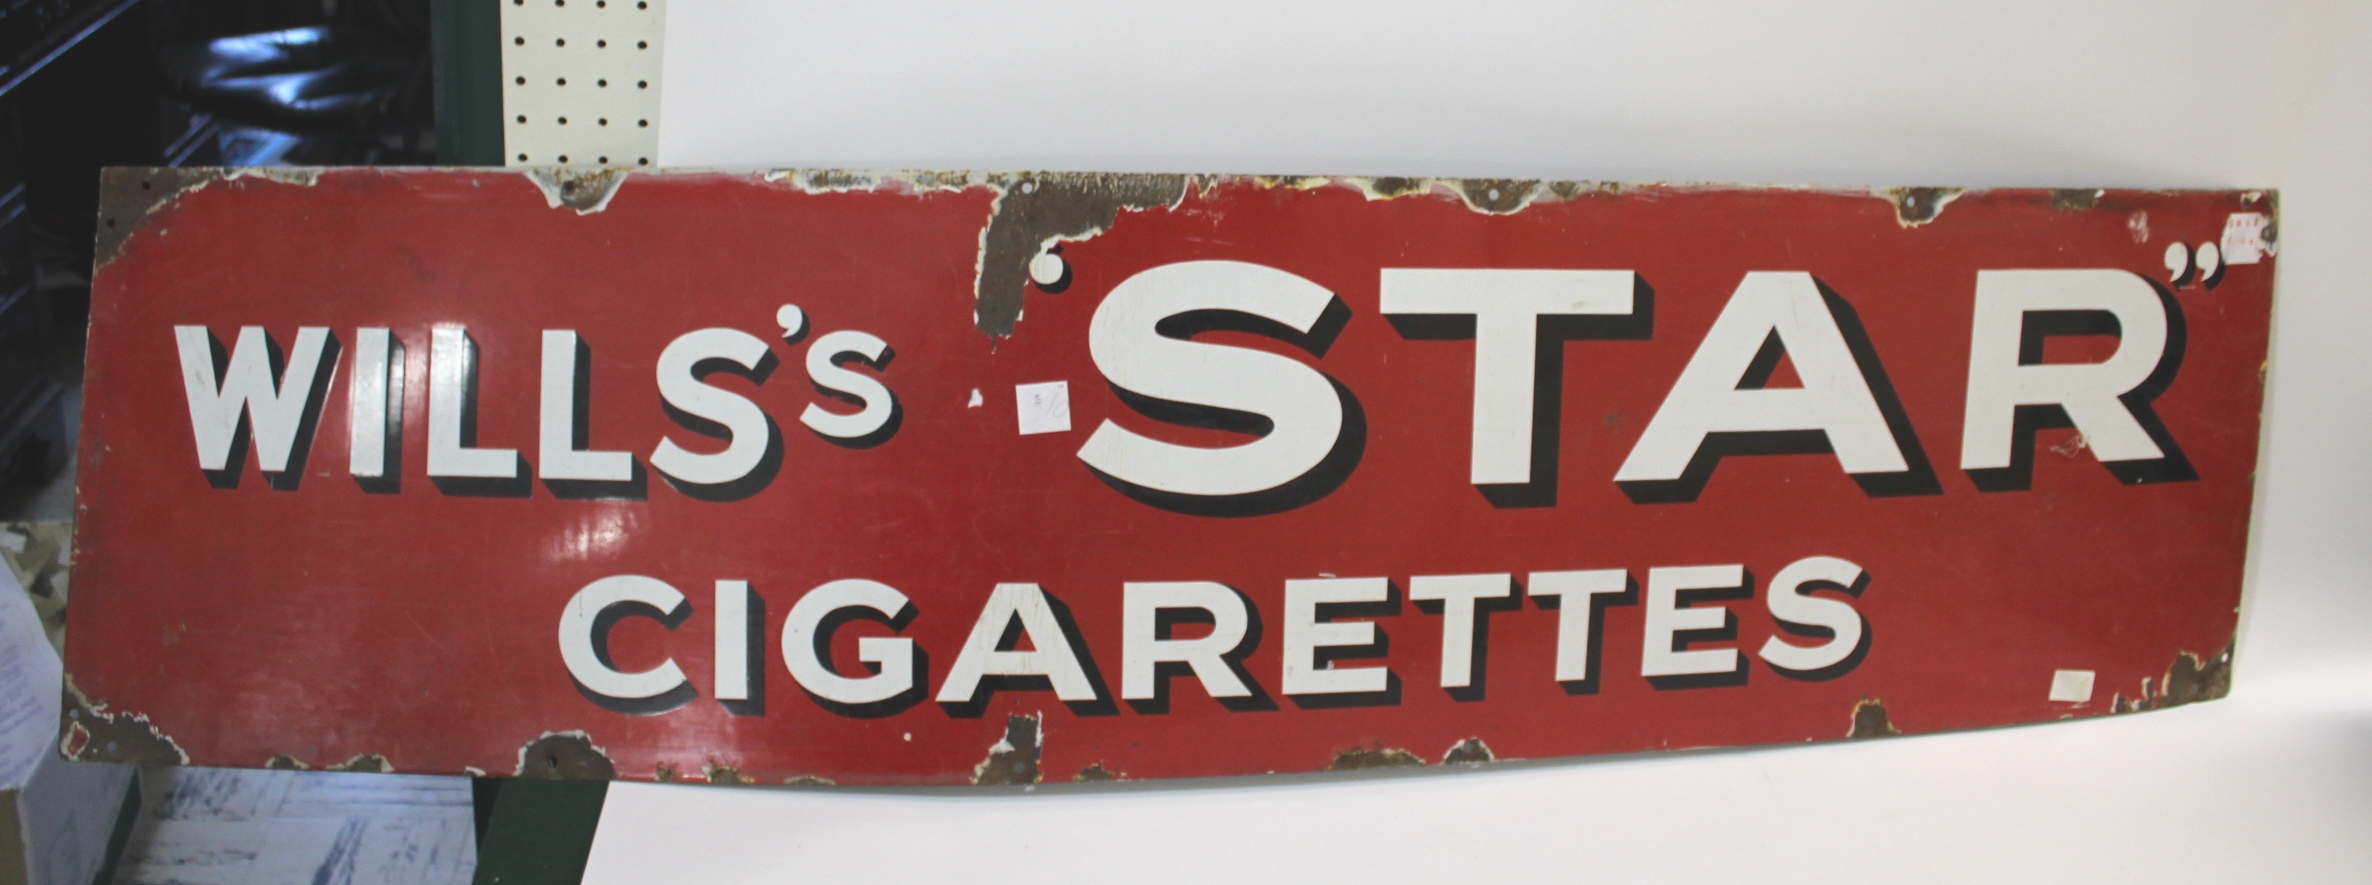 ENAMEL ADVERTISING SIGN - WILLS an enamel sign for Wills Star Cigarettes. 150cms by 38cms